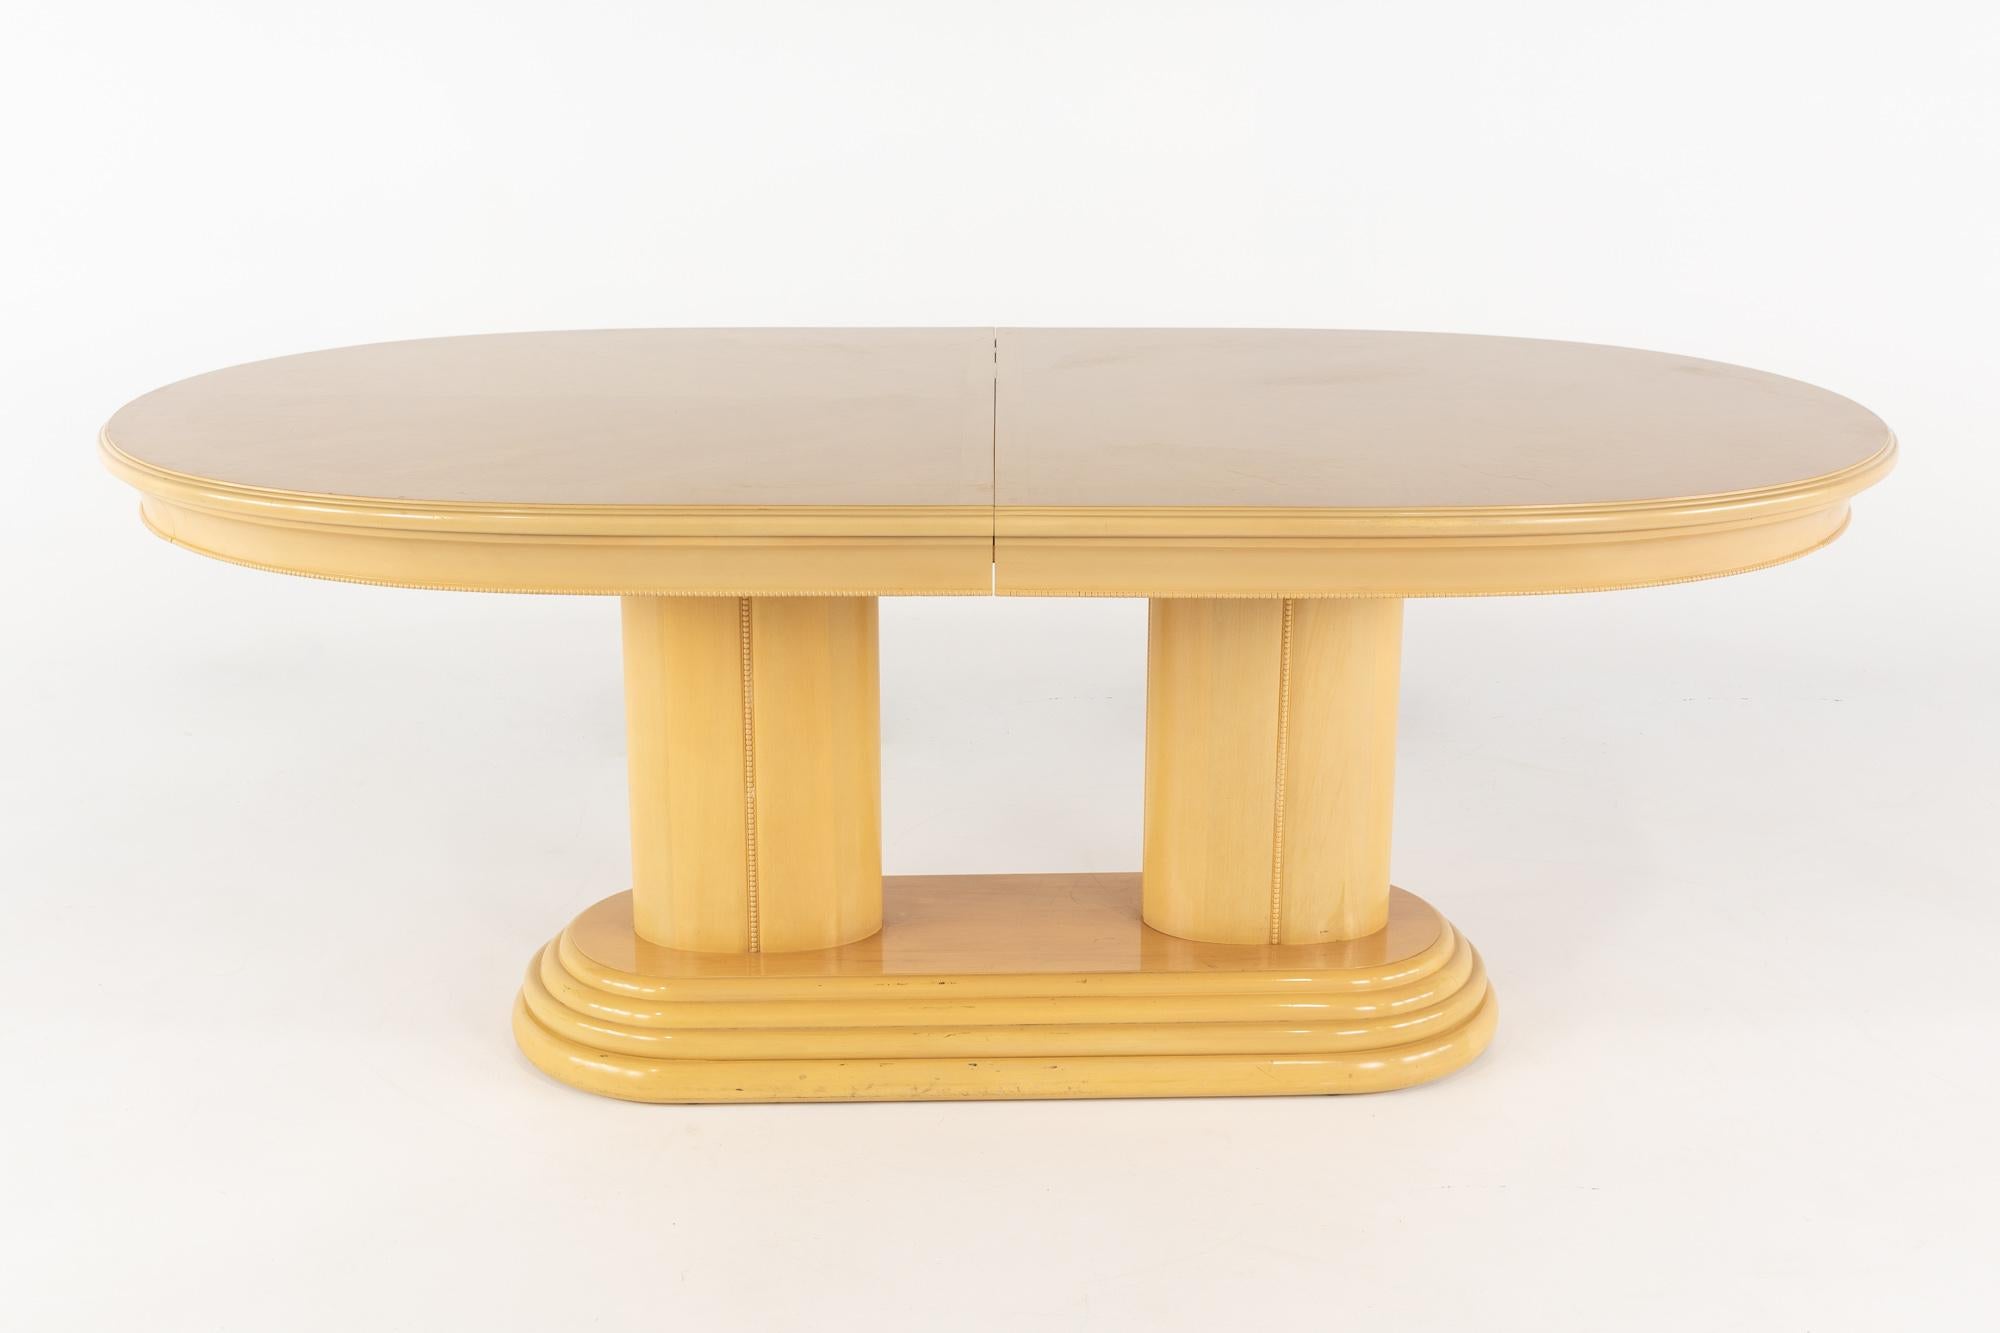 Henredon style cream pedestal dining table with 2 leaves

This table measures: 76 wide x 44 deep x 30 inches high, with a chair clearance of 26 inches. 

This set is in good vintage condition with minor marks, dents, and wear. The hardware is